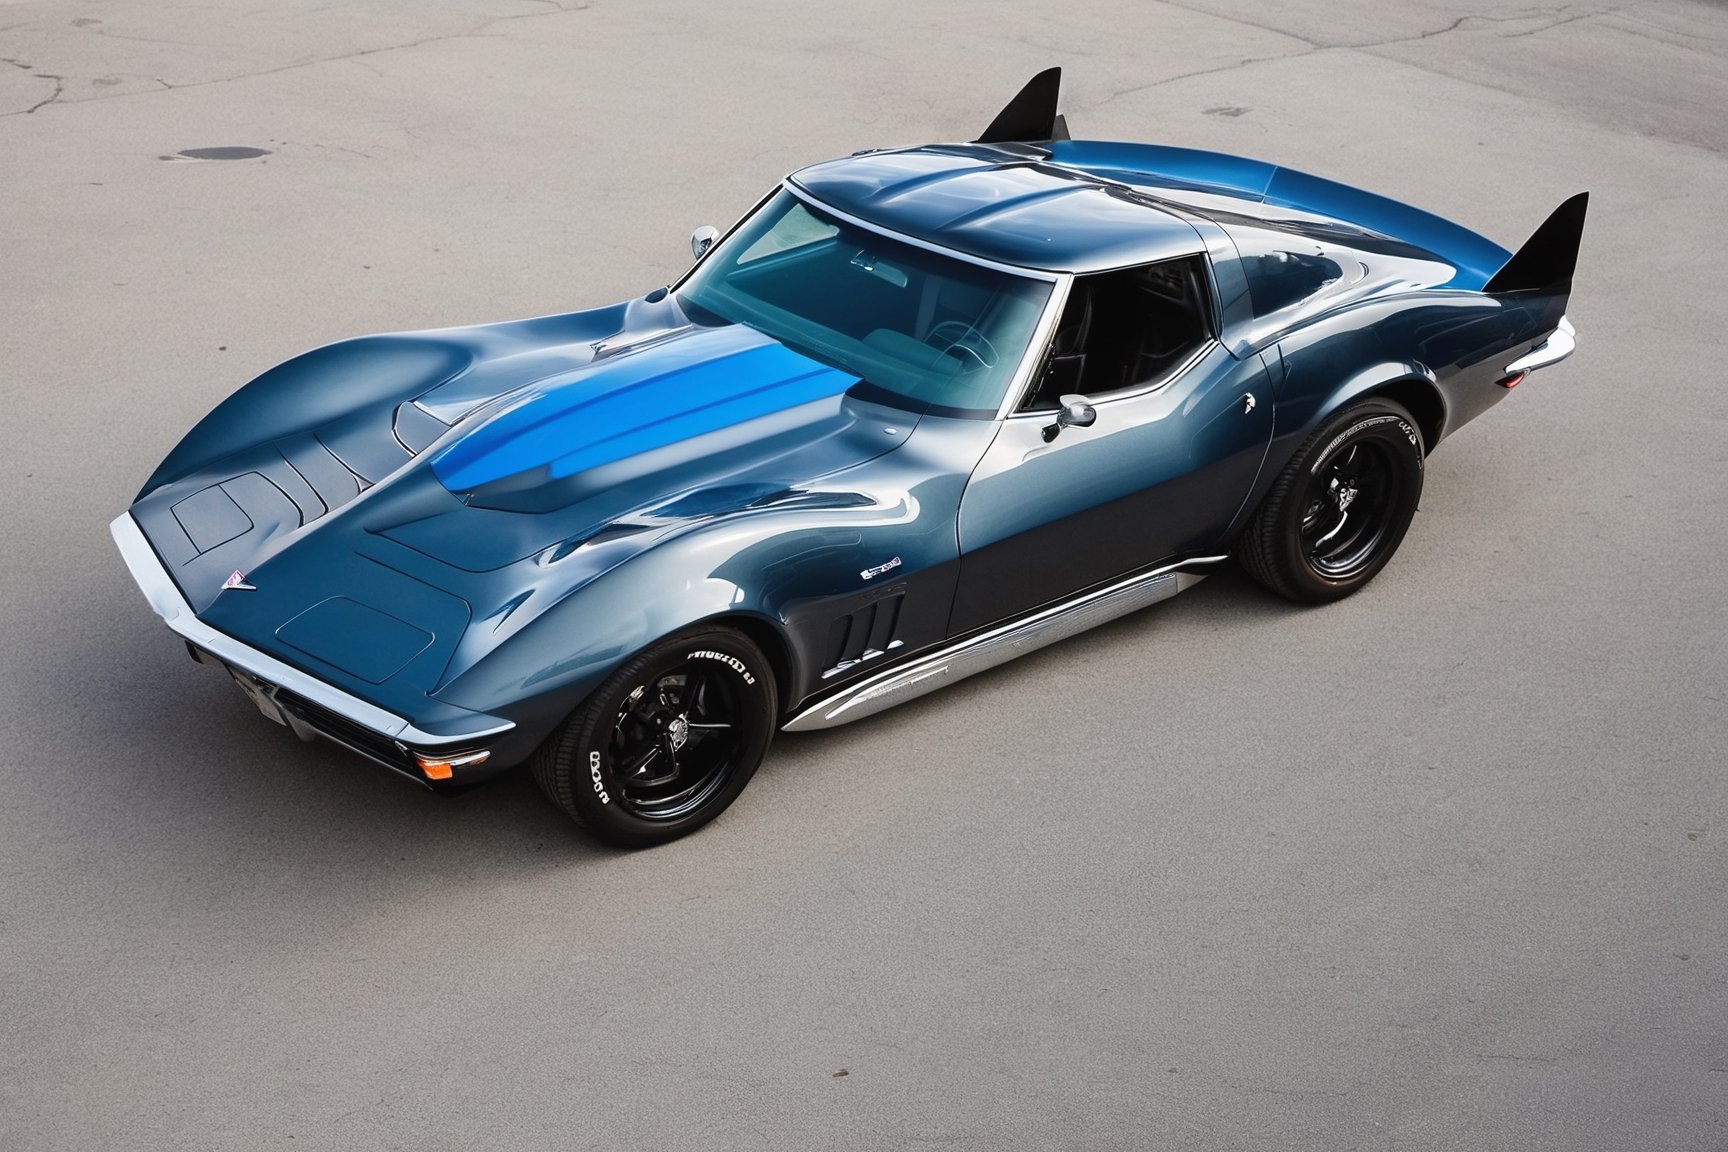 Photo of a Car, stingray, expensive, grey and blue theme, c 10.0, h 640, usa, ny, black wings instead of arms